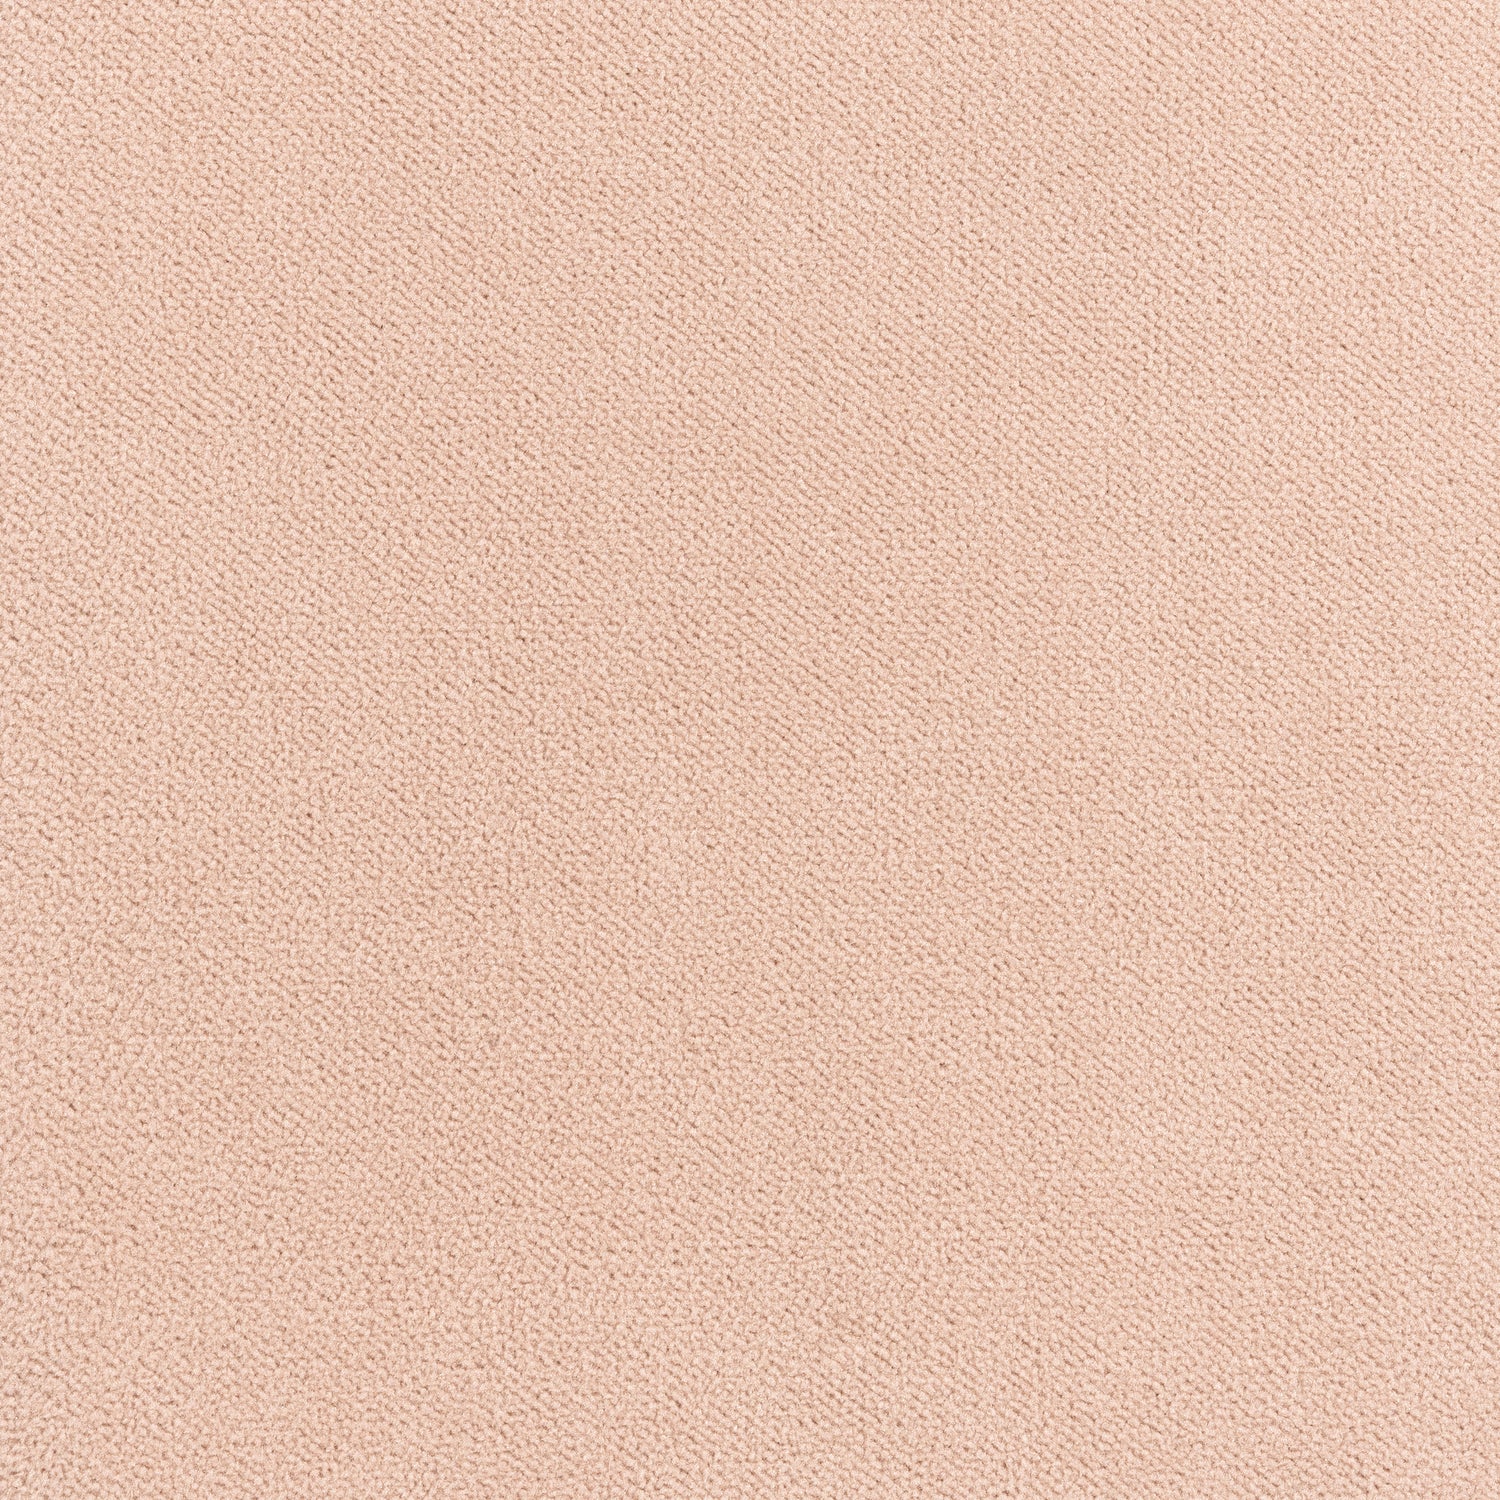 Club Velvet fabric in blush color - pattern number W7205 - by Thibaut in the Club Velvet collection